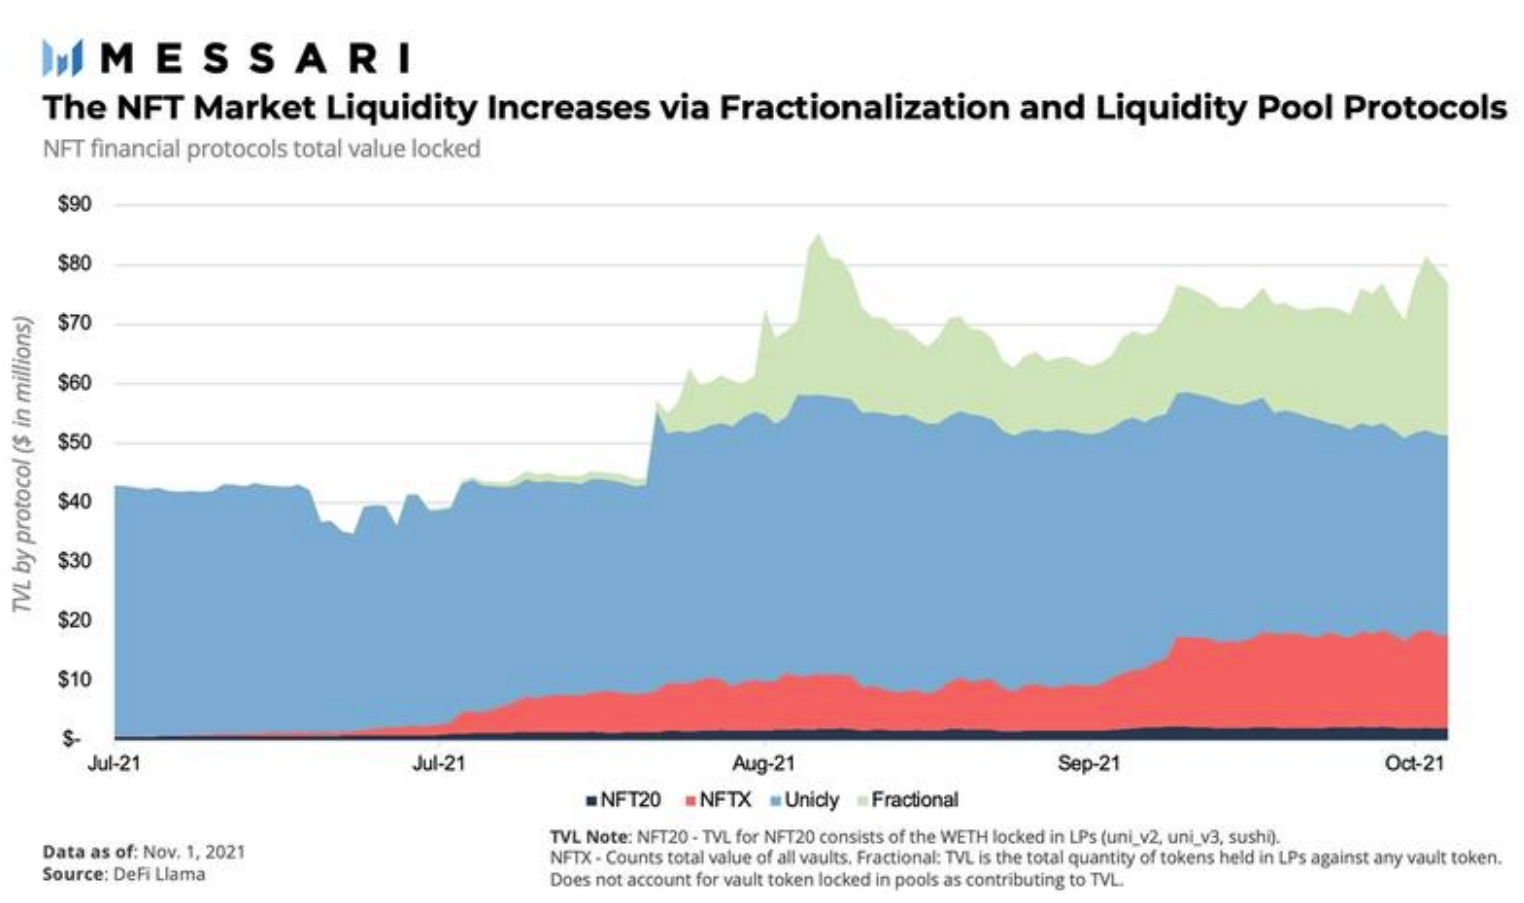 The increased NFT market liquidity driven by fractionalization